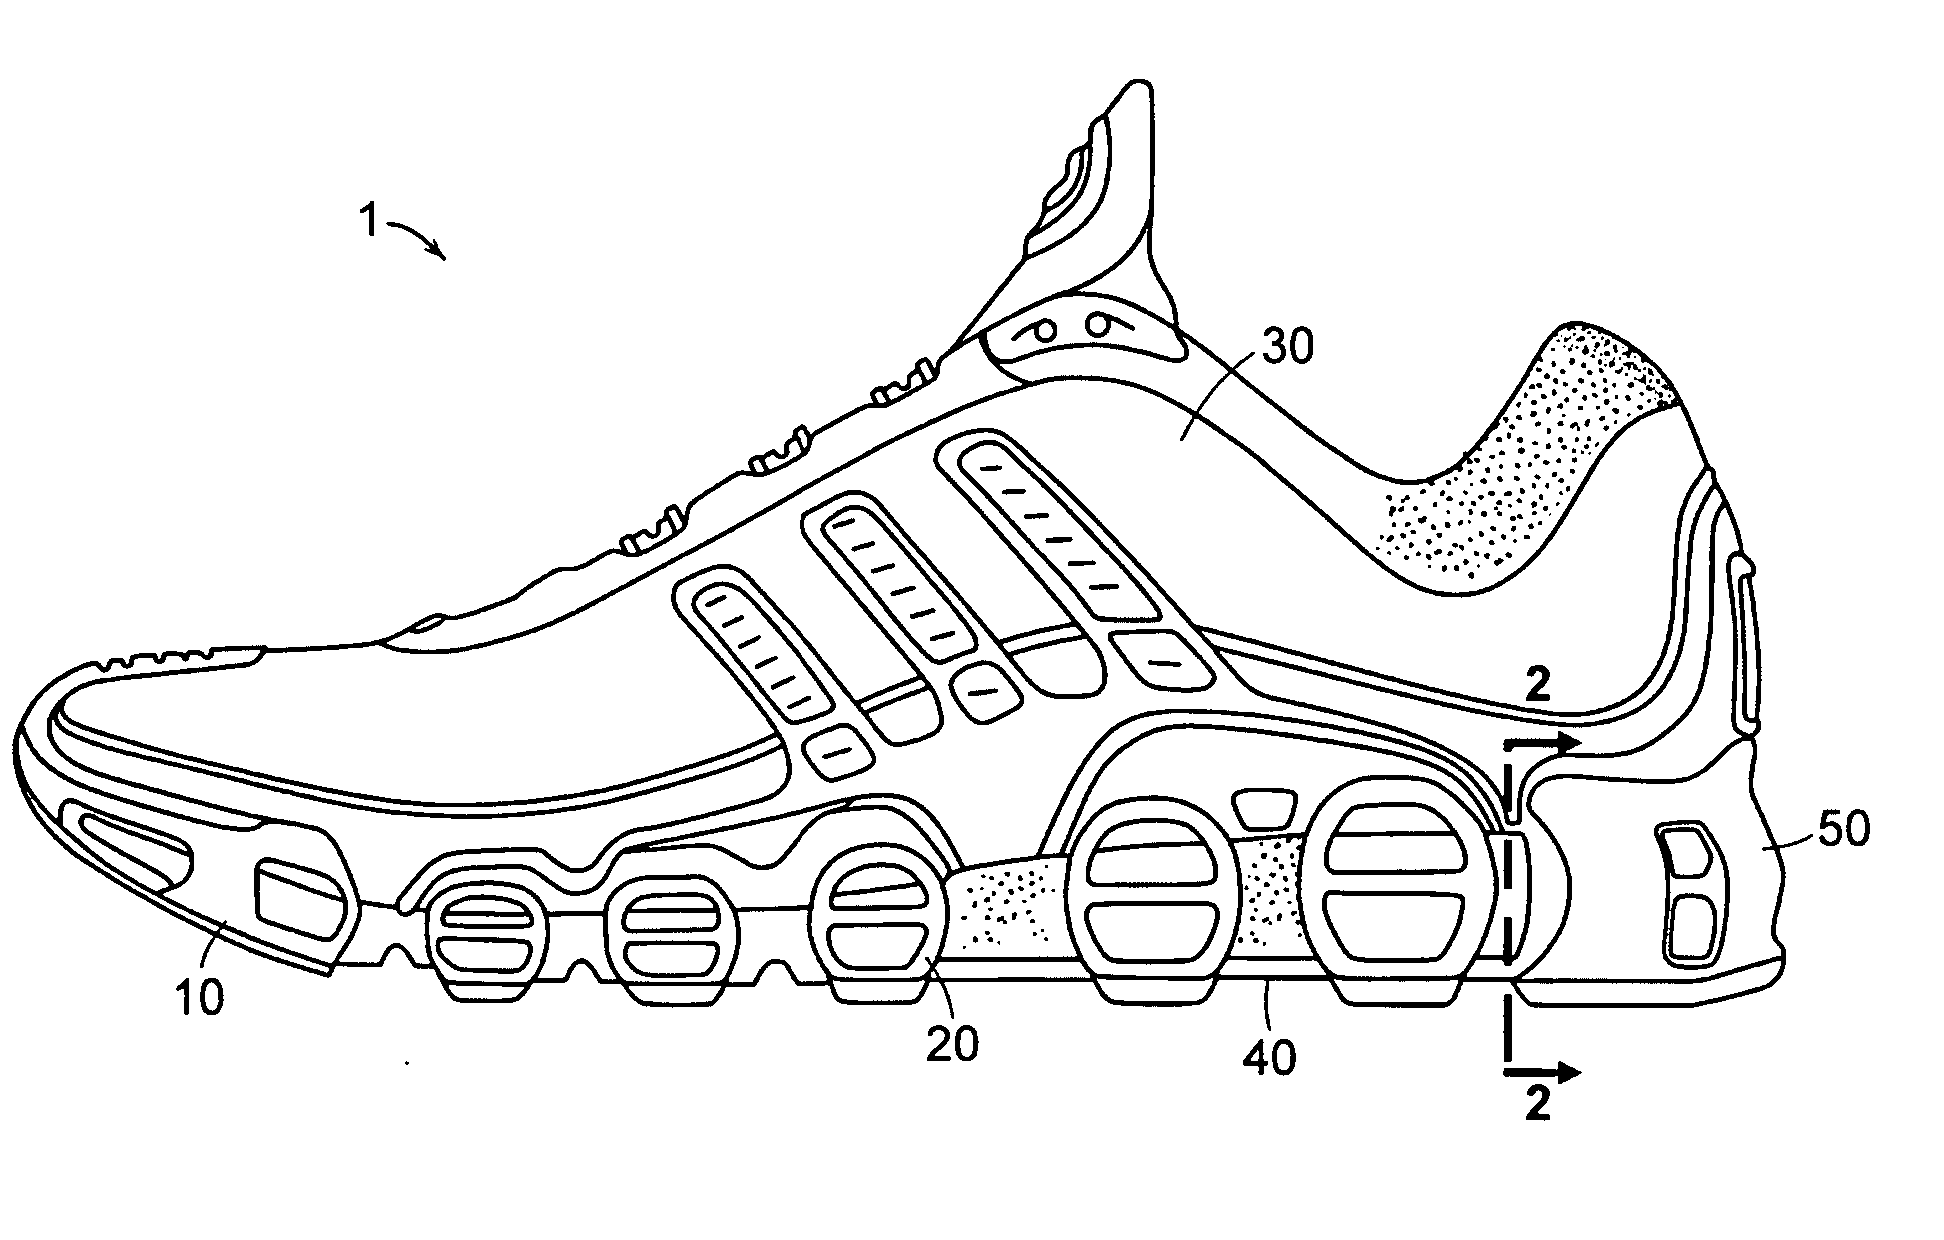 Structural element for a shoe sole